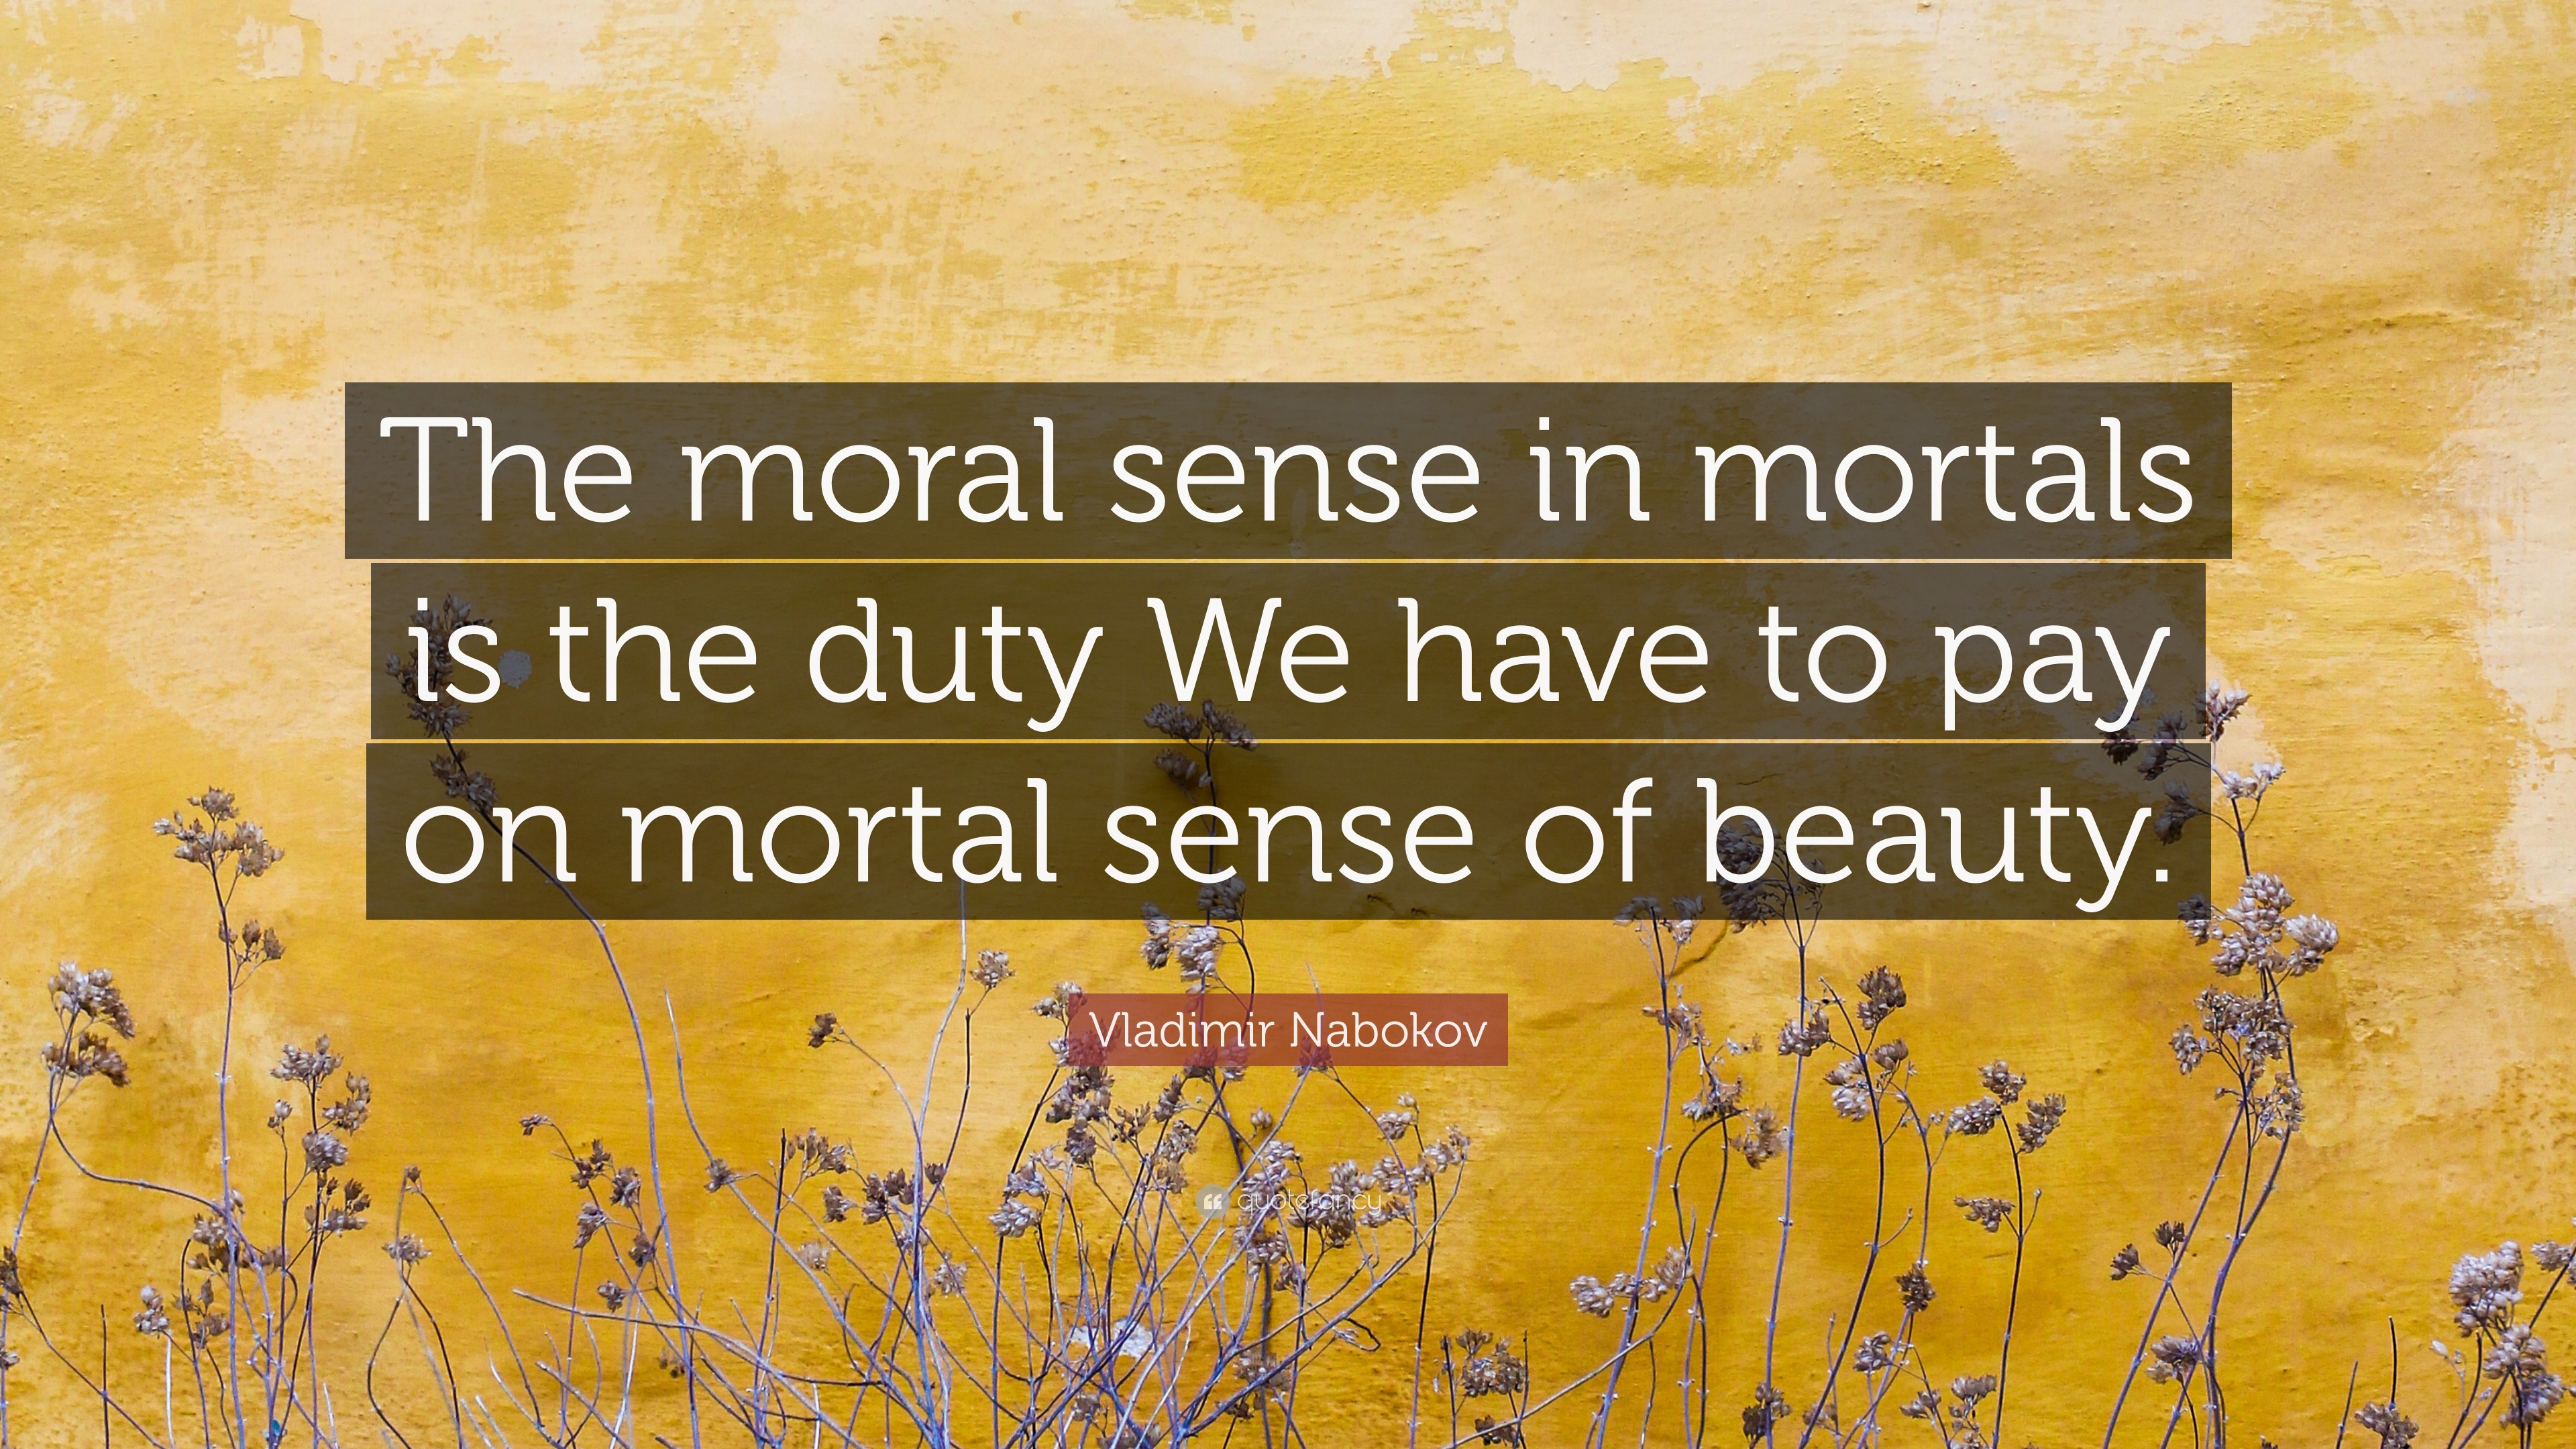 Vladimir Nabokov Quote “the Moral Sense In Mortals Is The Duty We Have